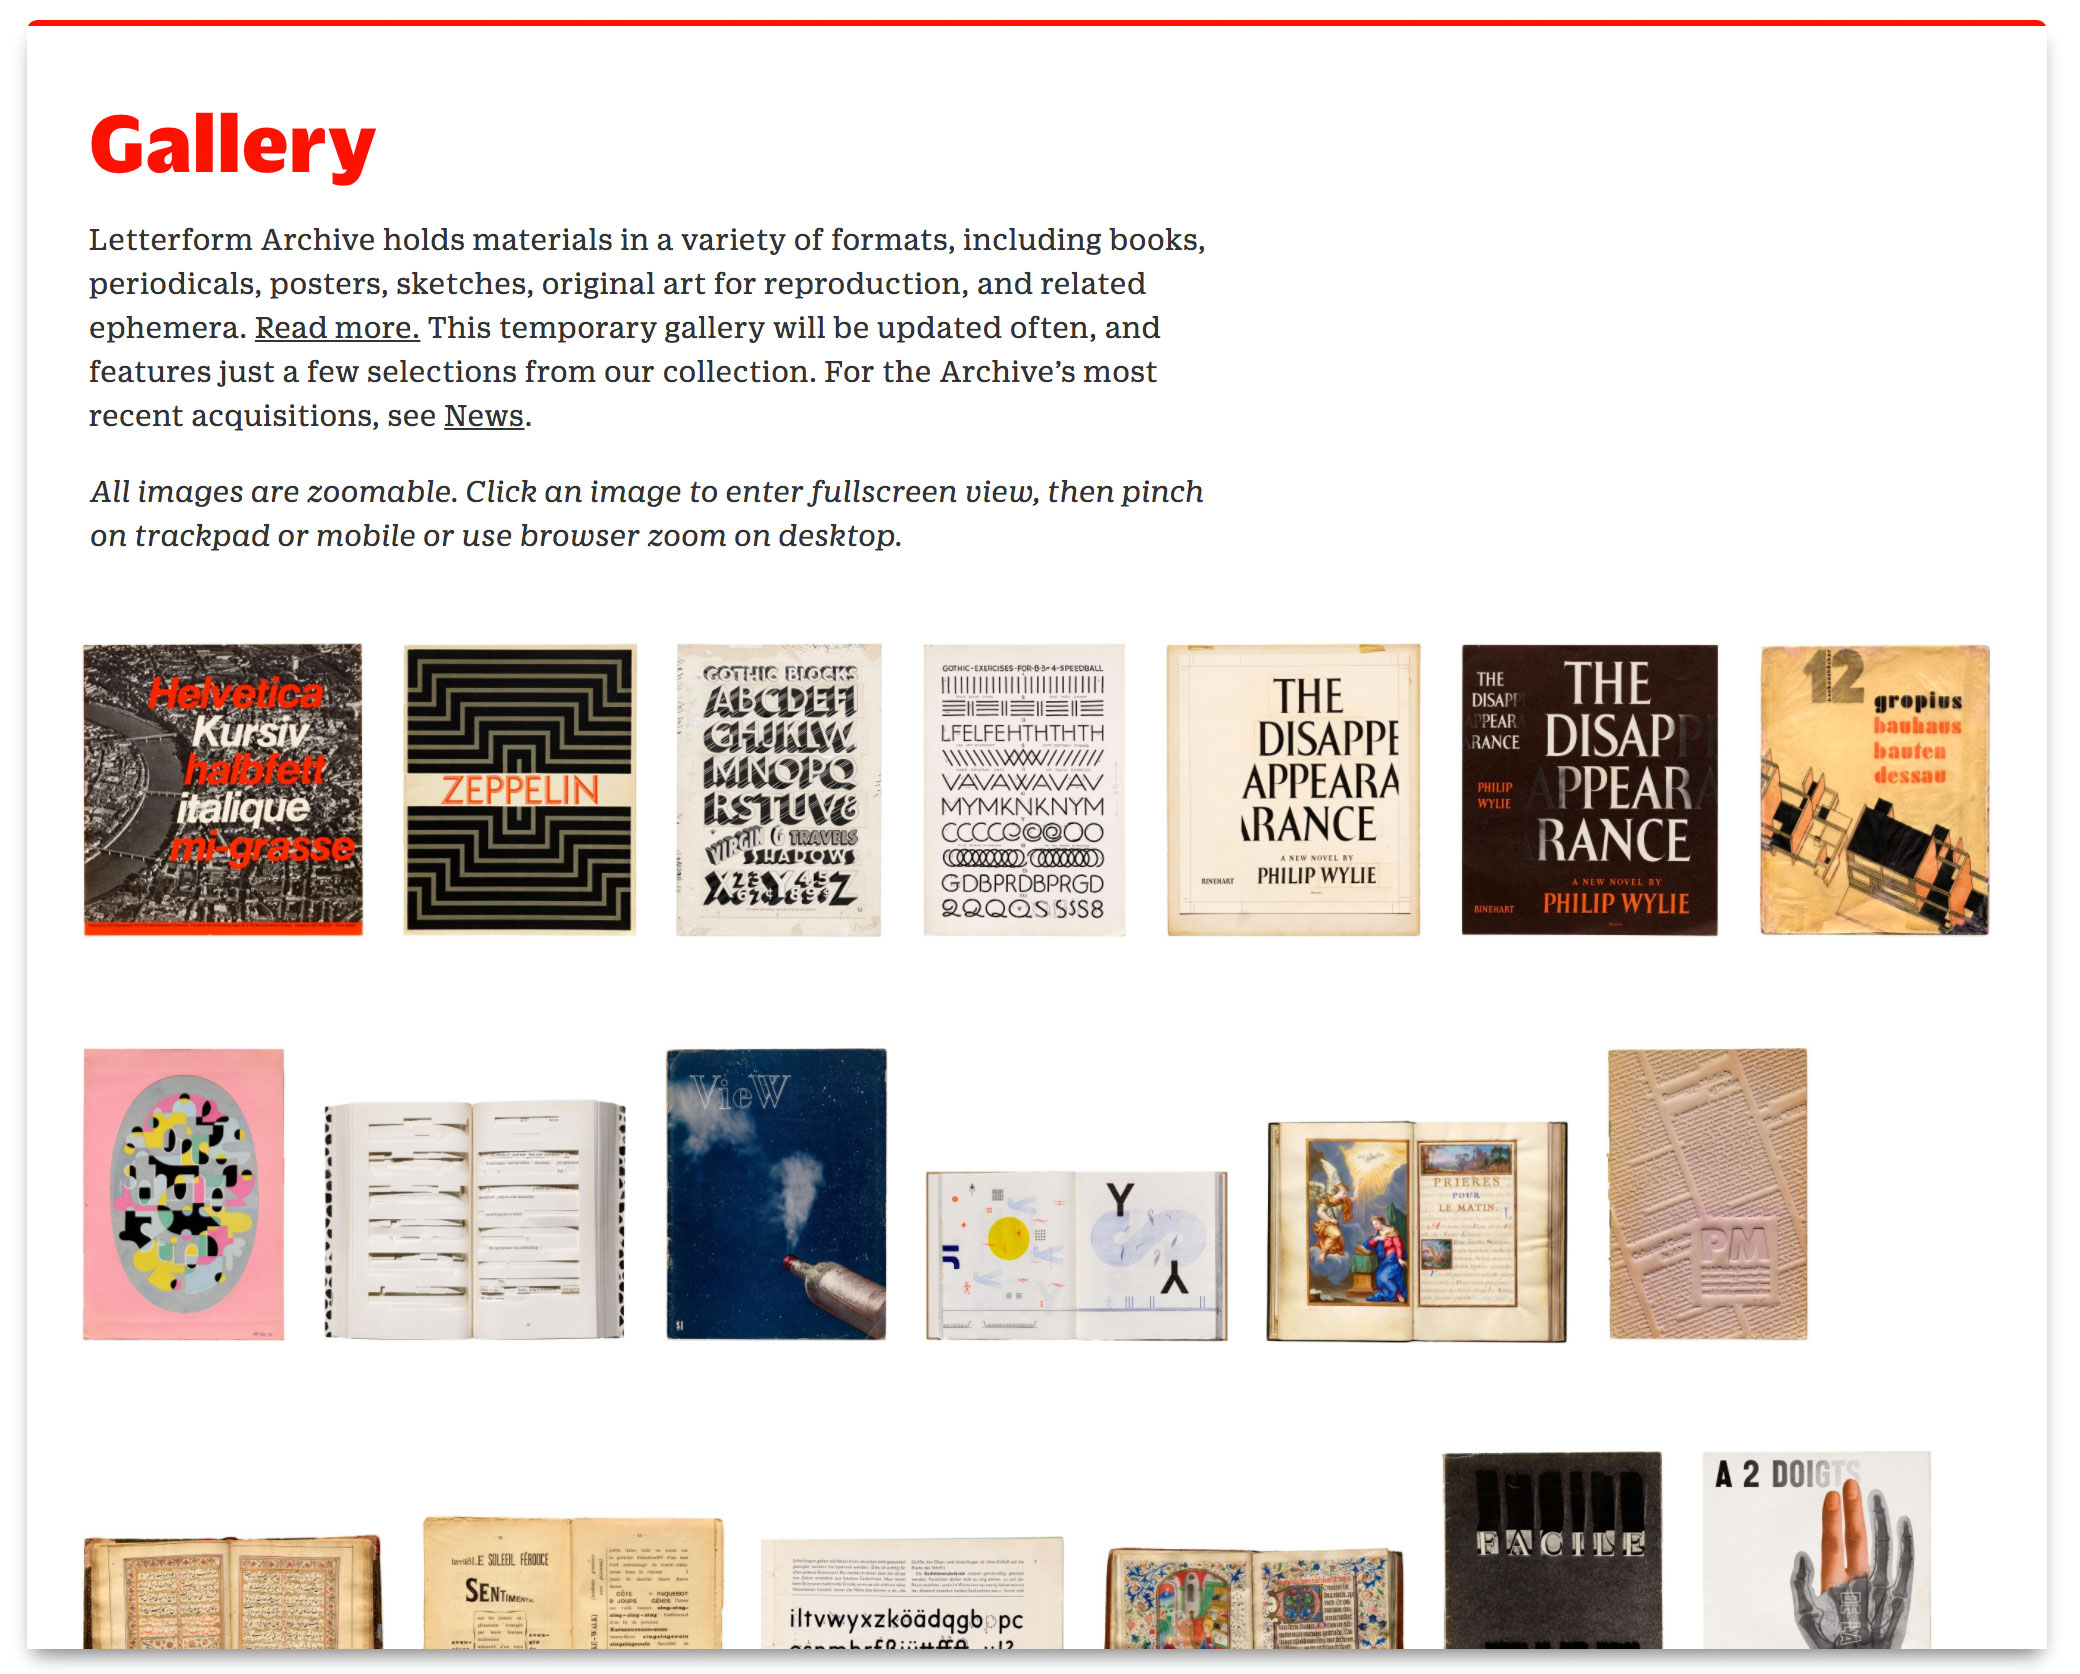 New Letterform Archive online gallery